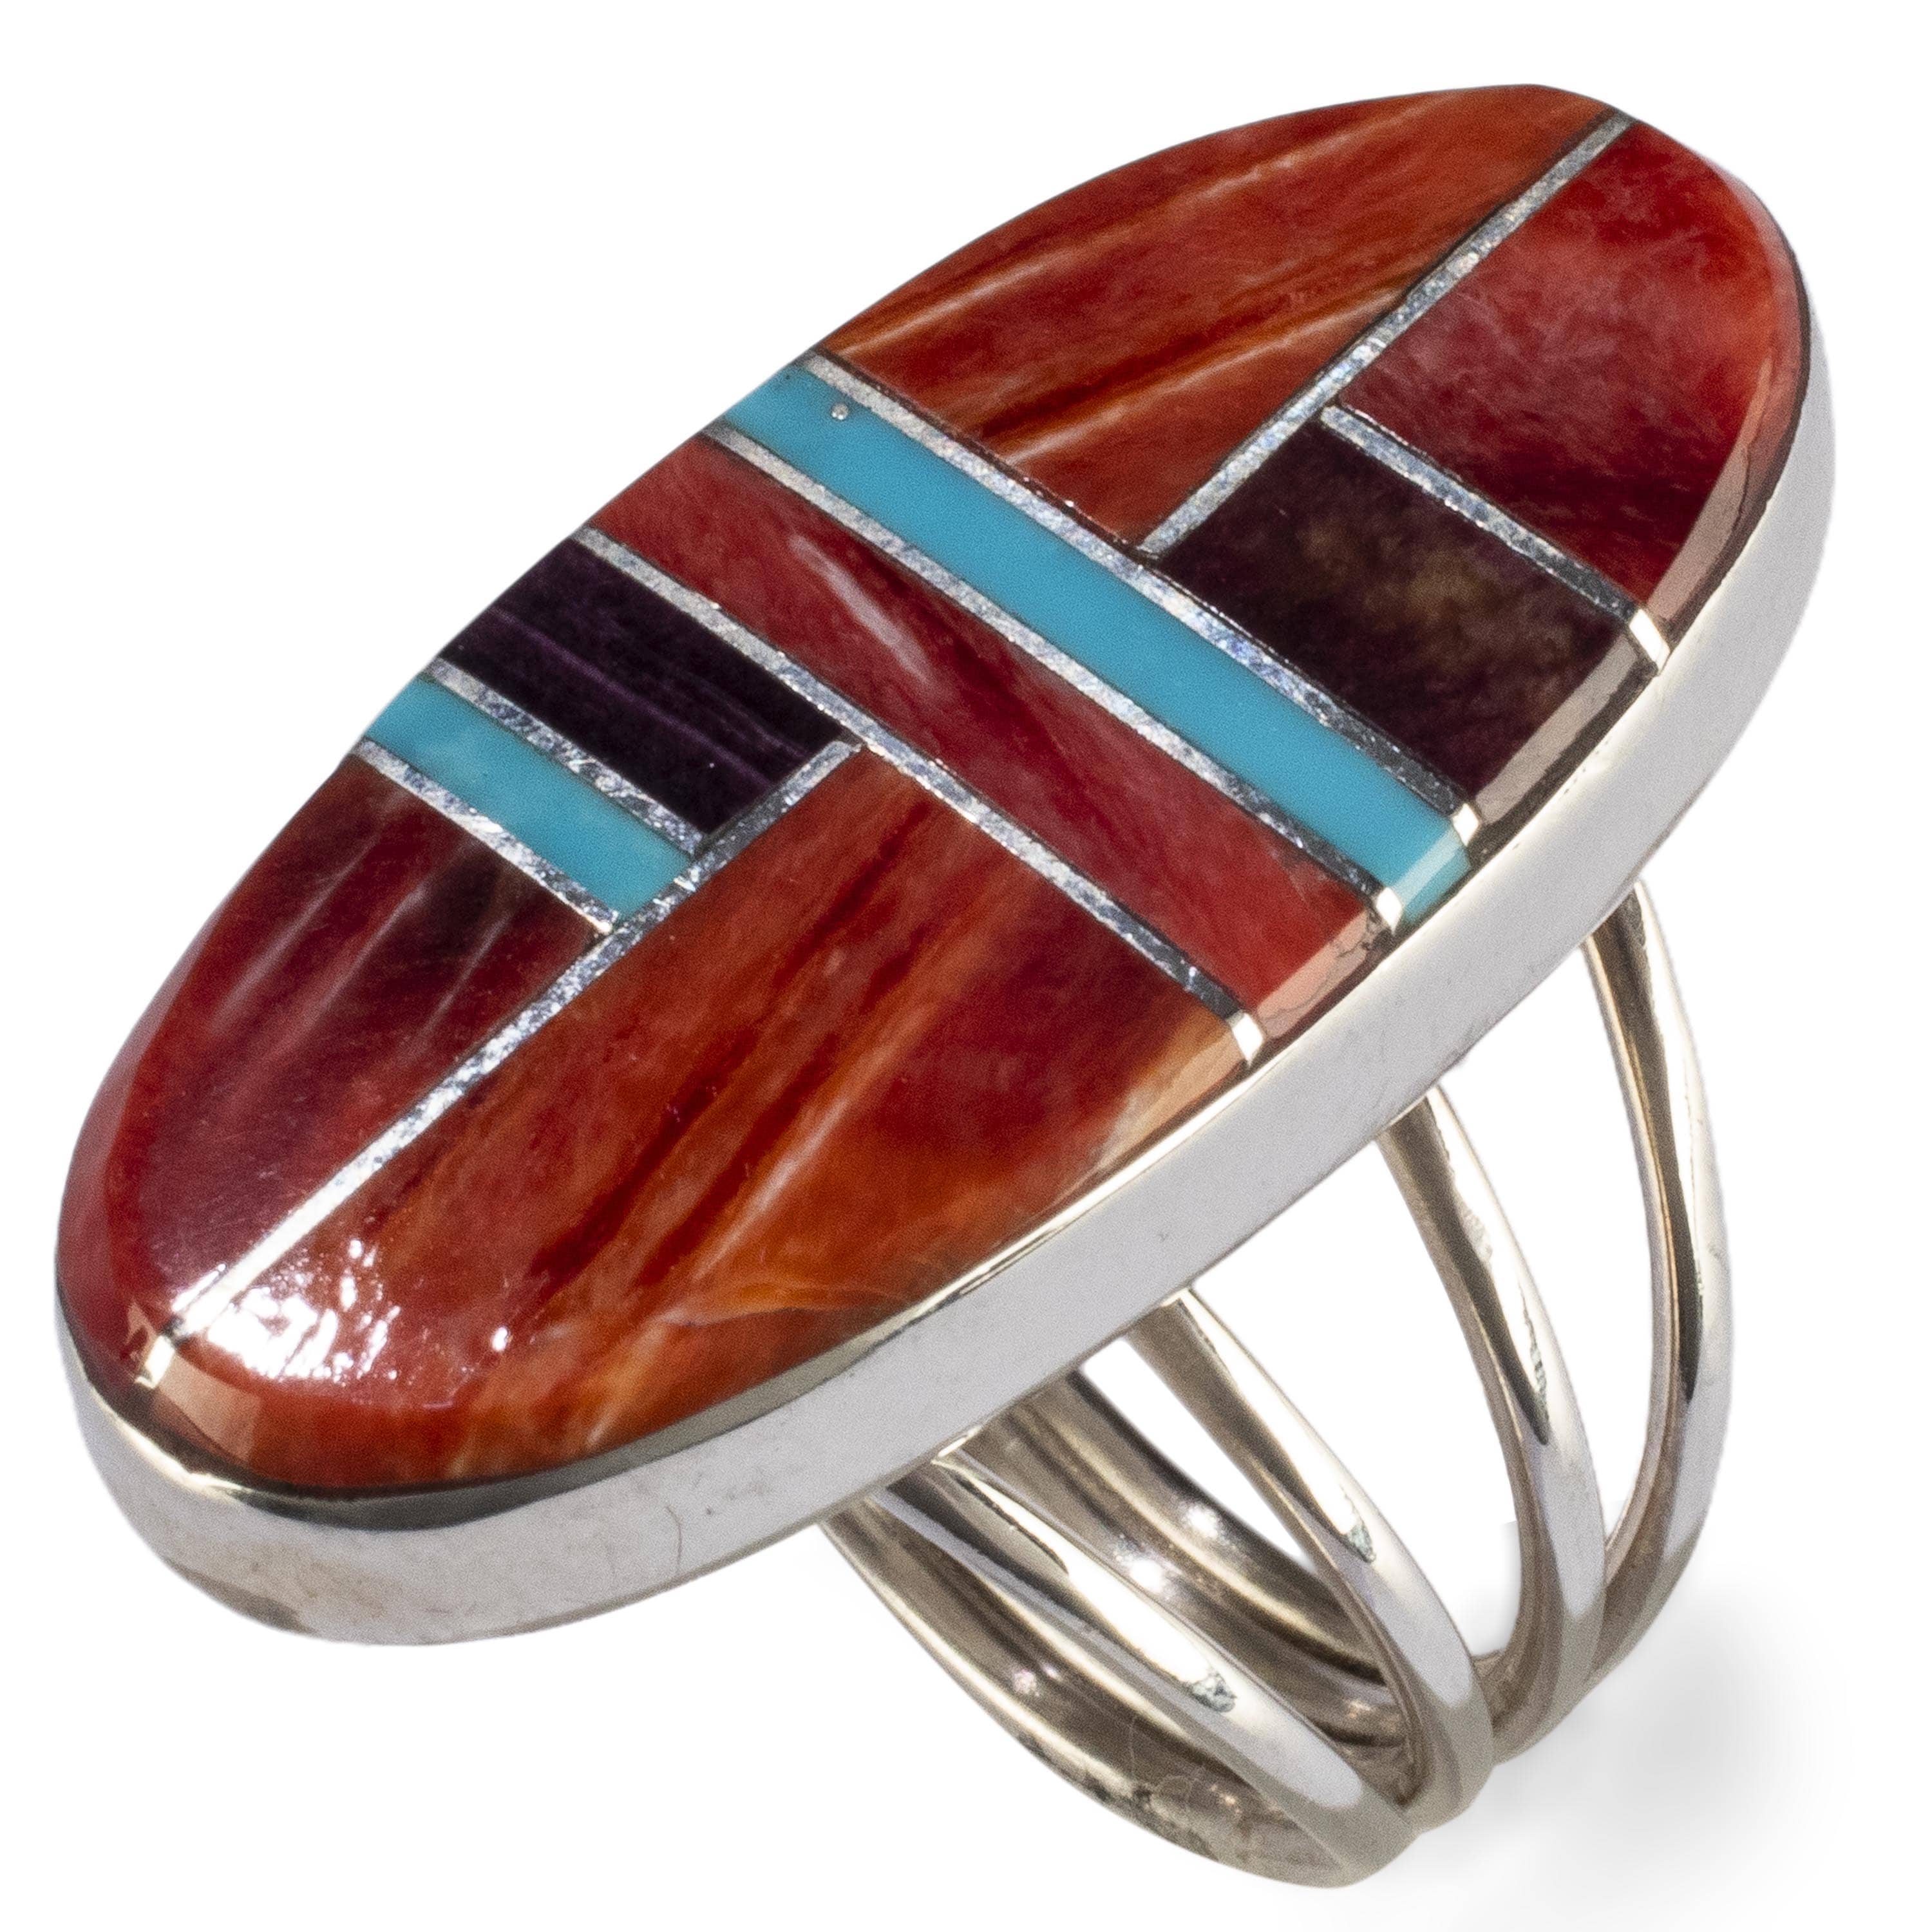 Kalifano Native American Jewelry 6 Red, Orange, and Purple Spiny Oyster Shell with Turquoise Inlay USA Native American Made 925 Sterling Silver Ring NAR800.040.6